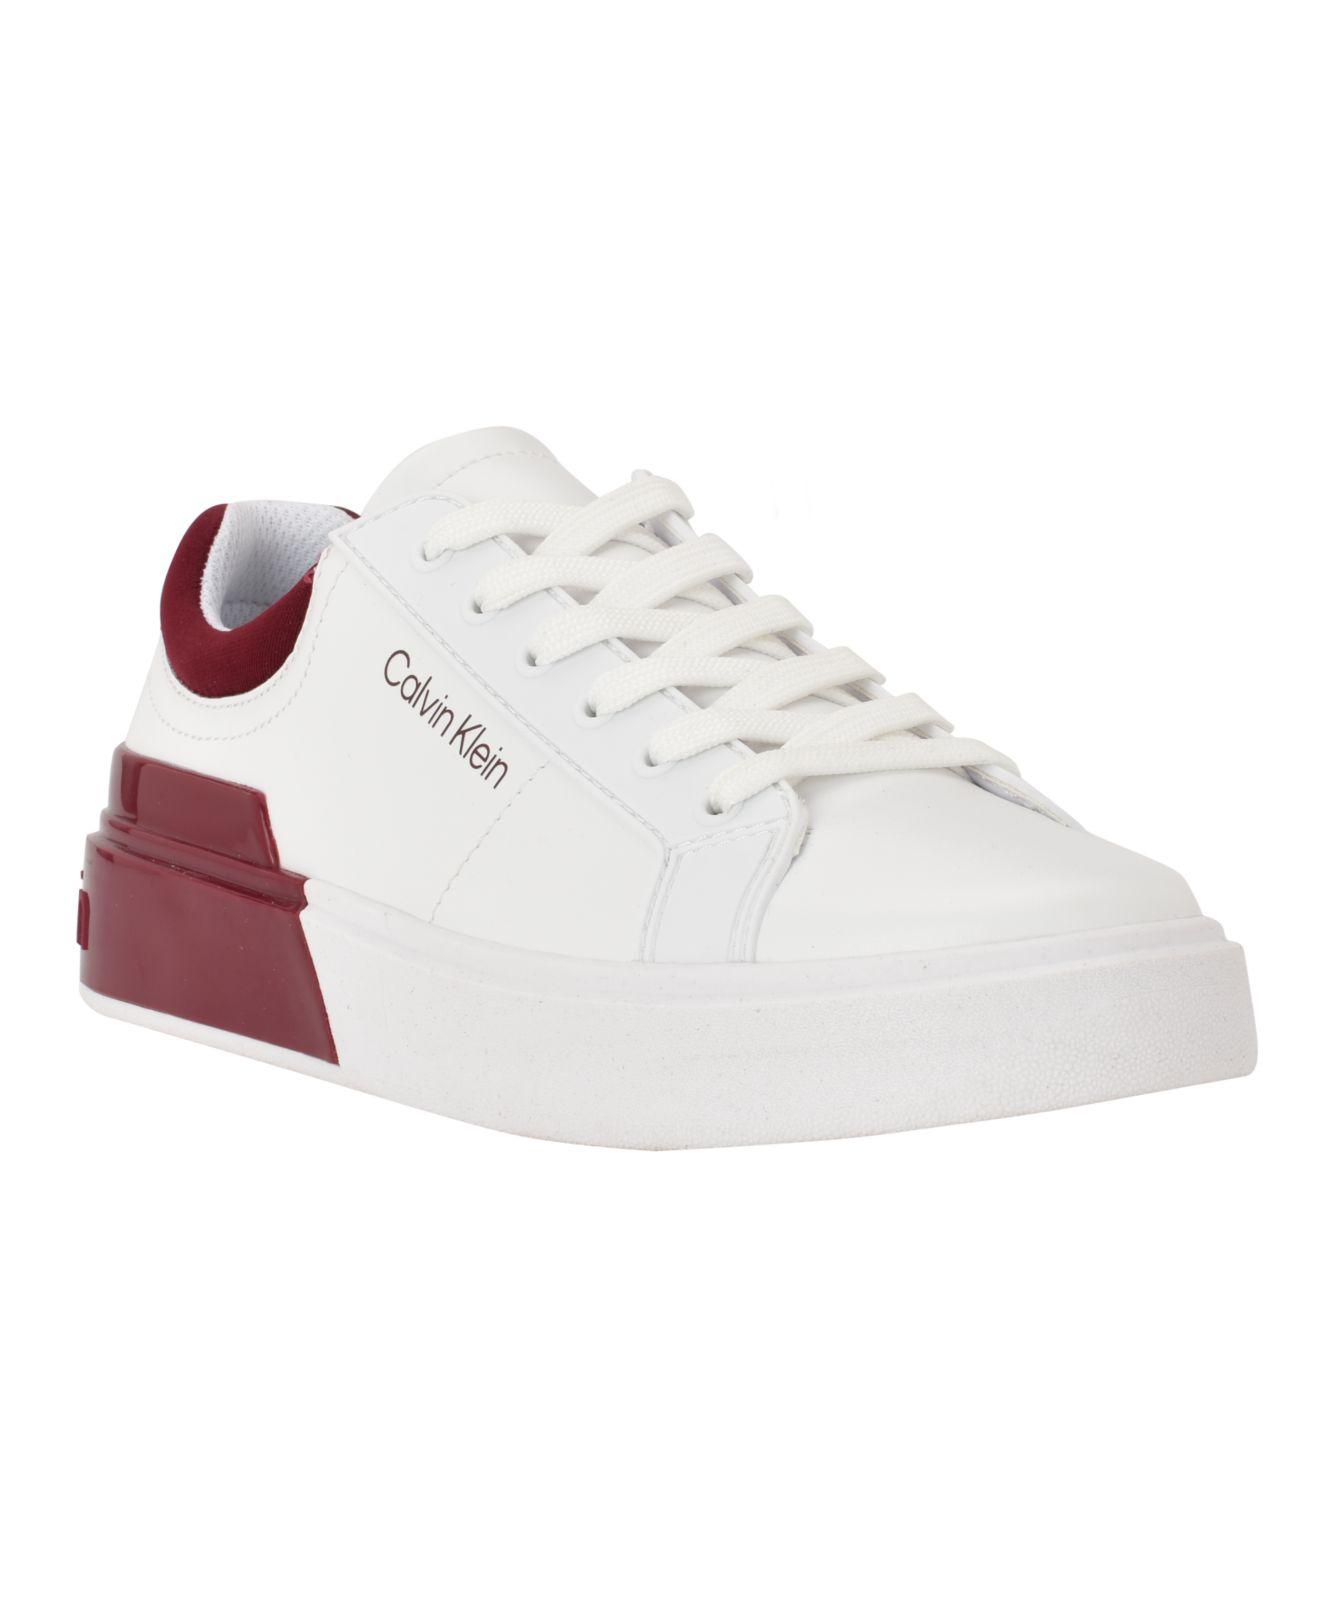 Calvin Klein Berna Lace-up Sneakers in White | Lyst